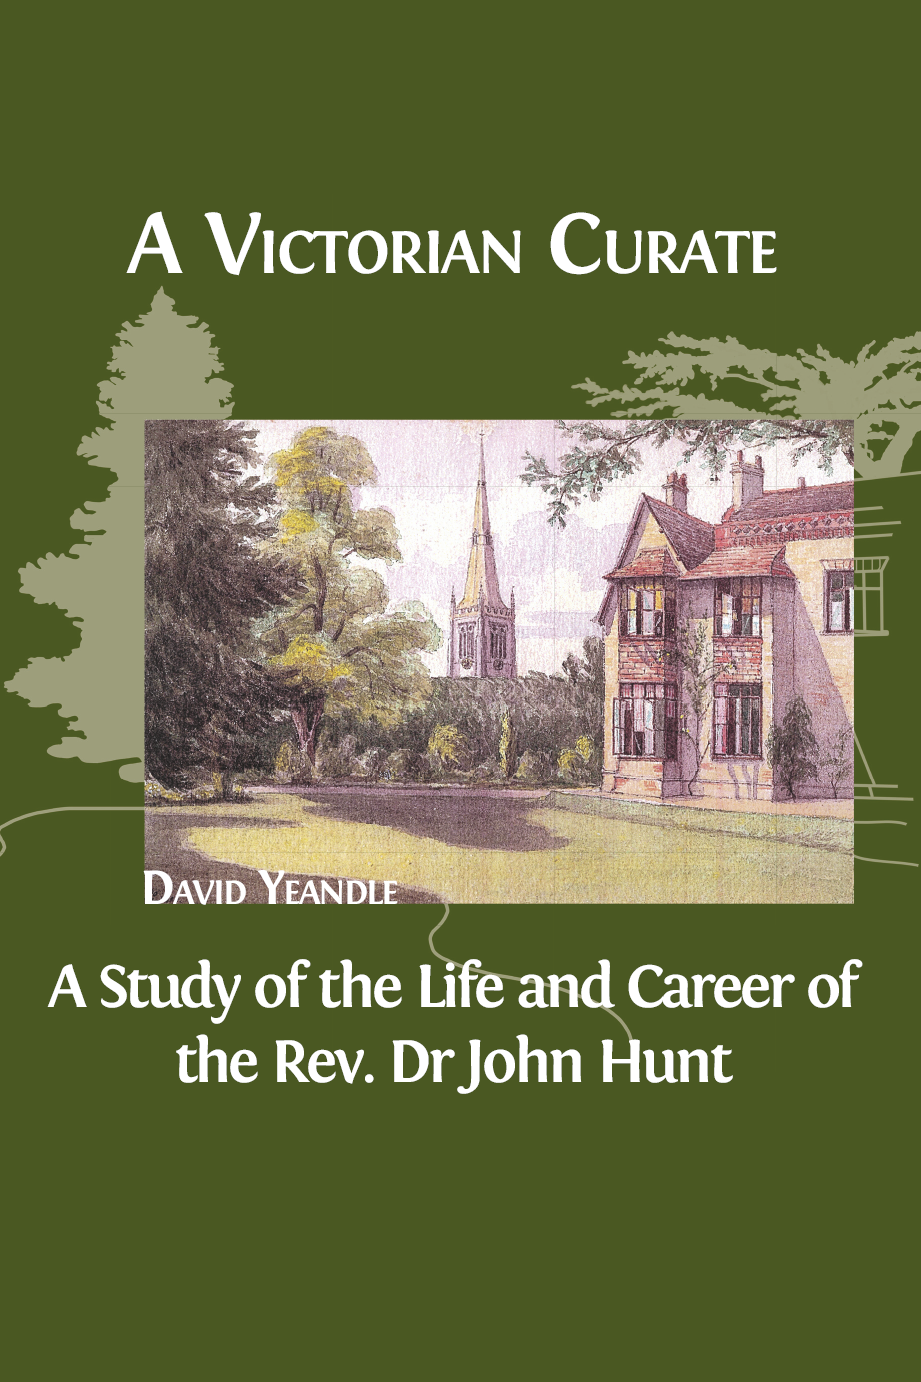 A Victorian Curate book cover image